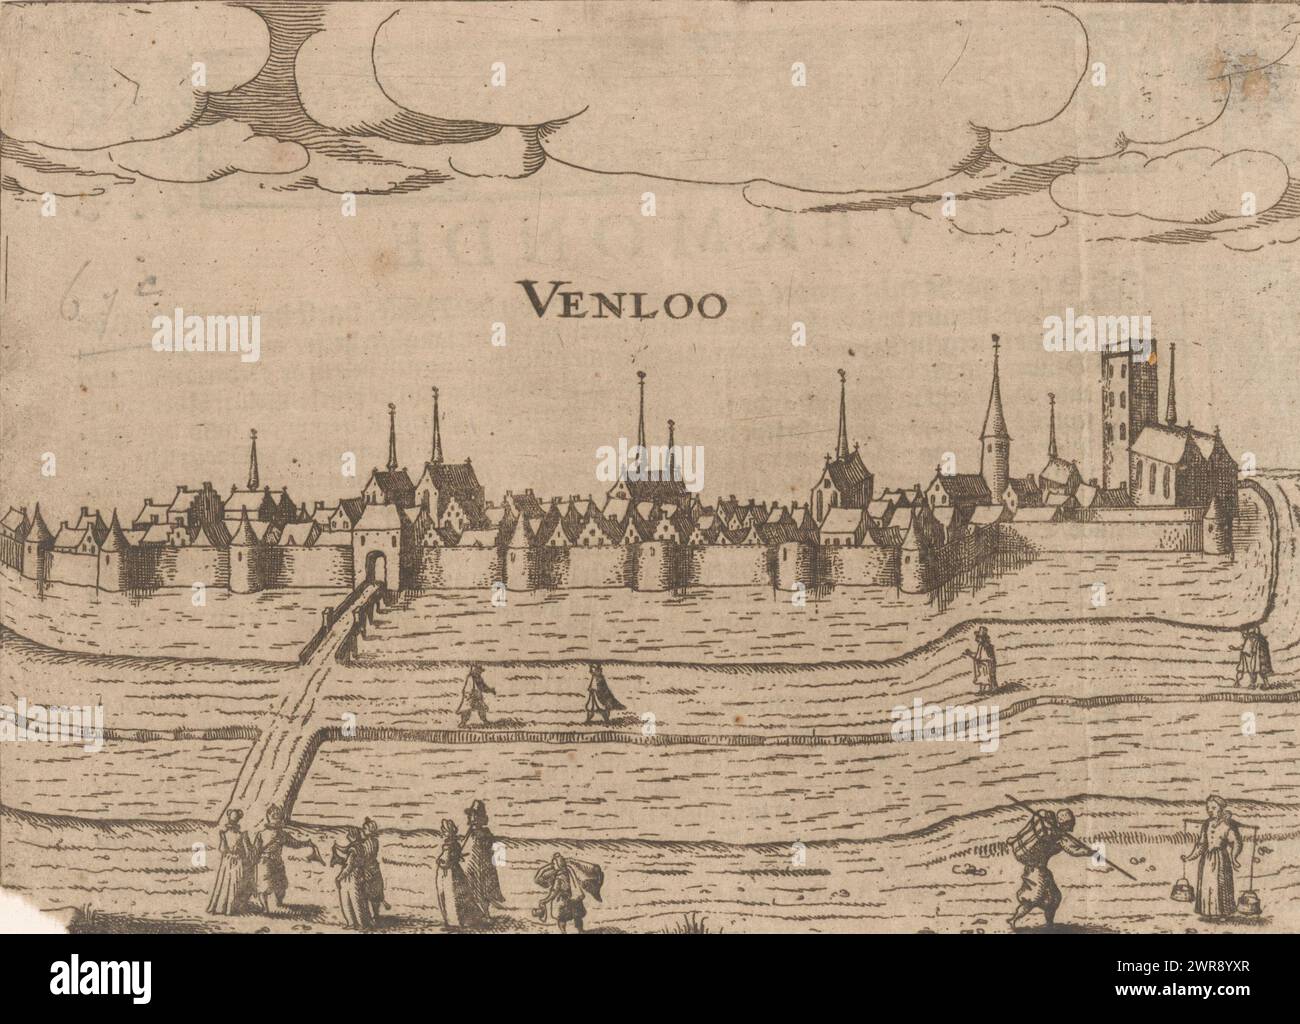 View of Venlo, Venloo (title on object), View of Venlo from the southeast. You can see the Keulsepoort, also called the Laarpoort. Dutch text on verso., print maker: anonymous, publisher: Jan Jansz., Arnhem, 1615, paper, etching, letterpress printing, height 140 mm × width 195 mm, print Stock Photo